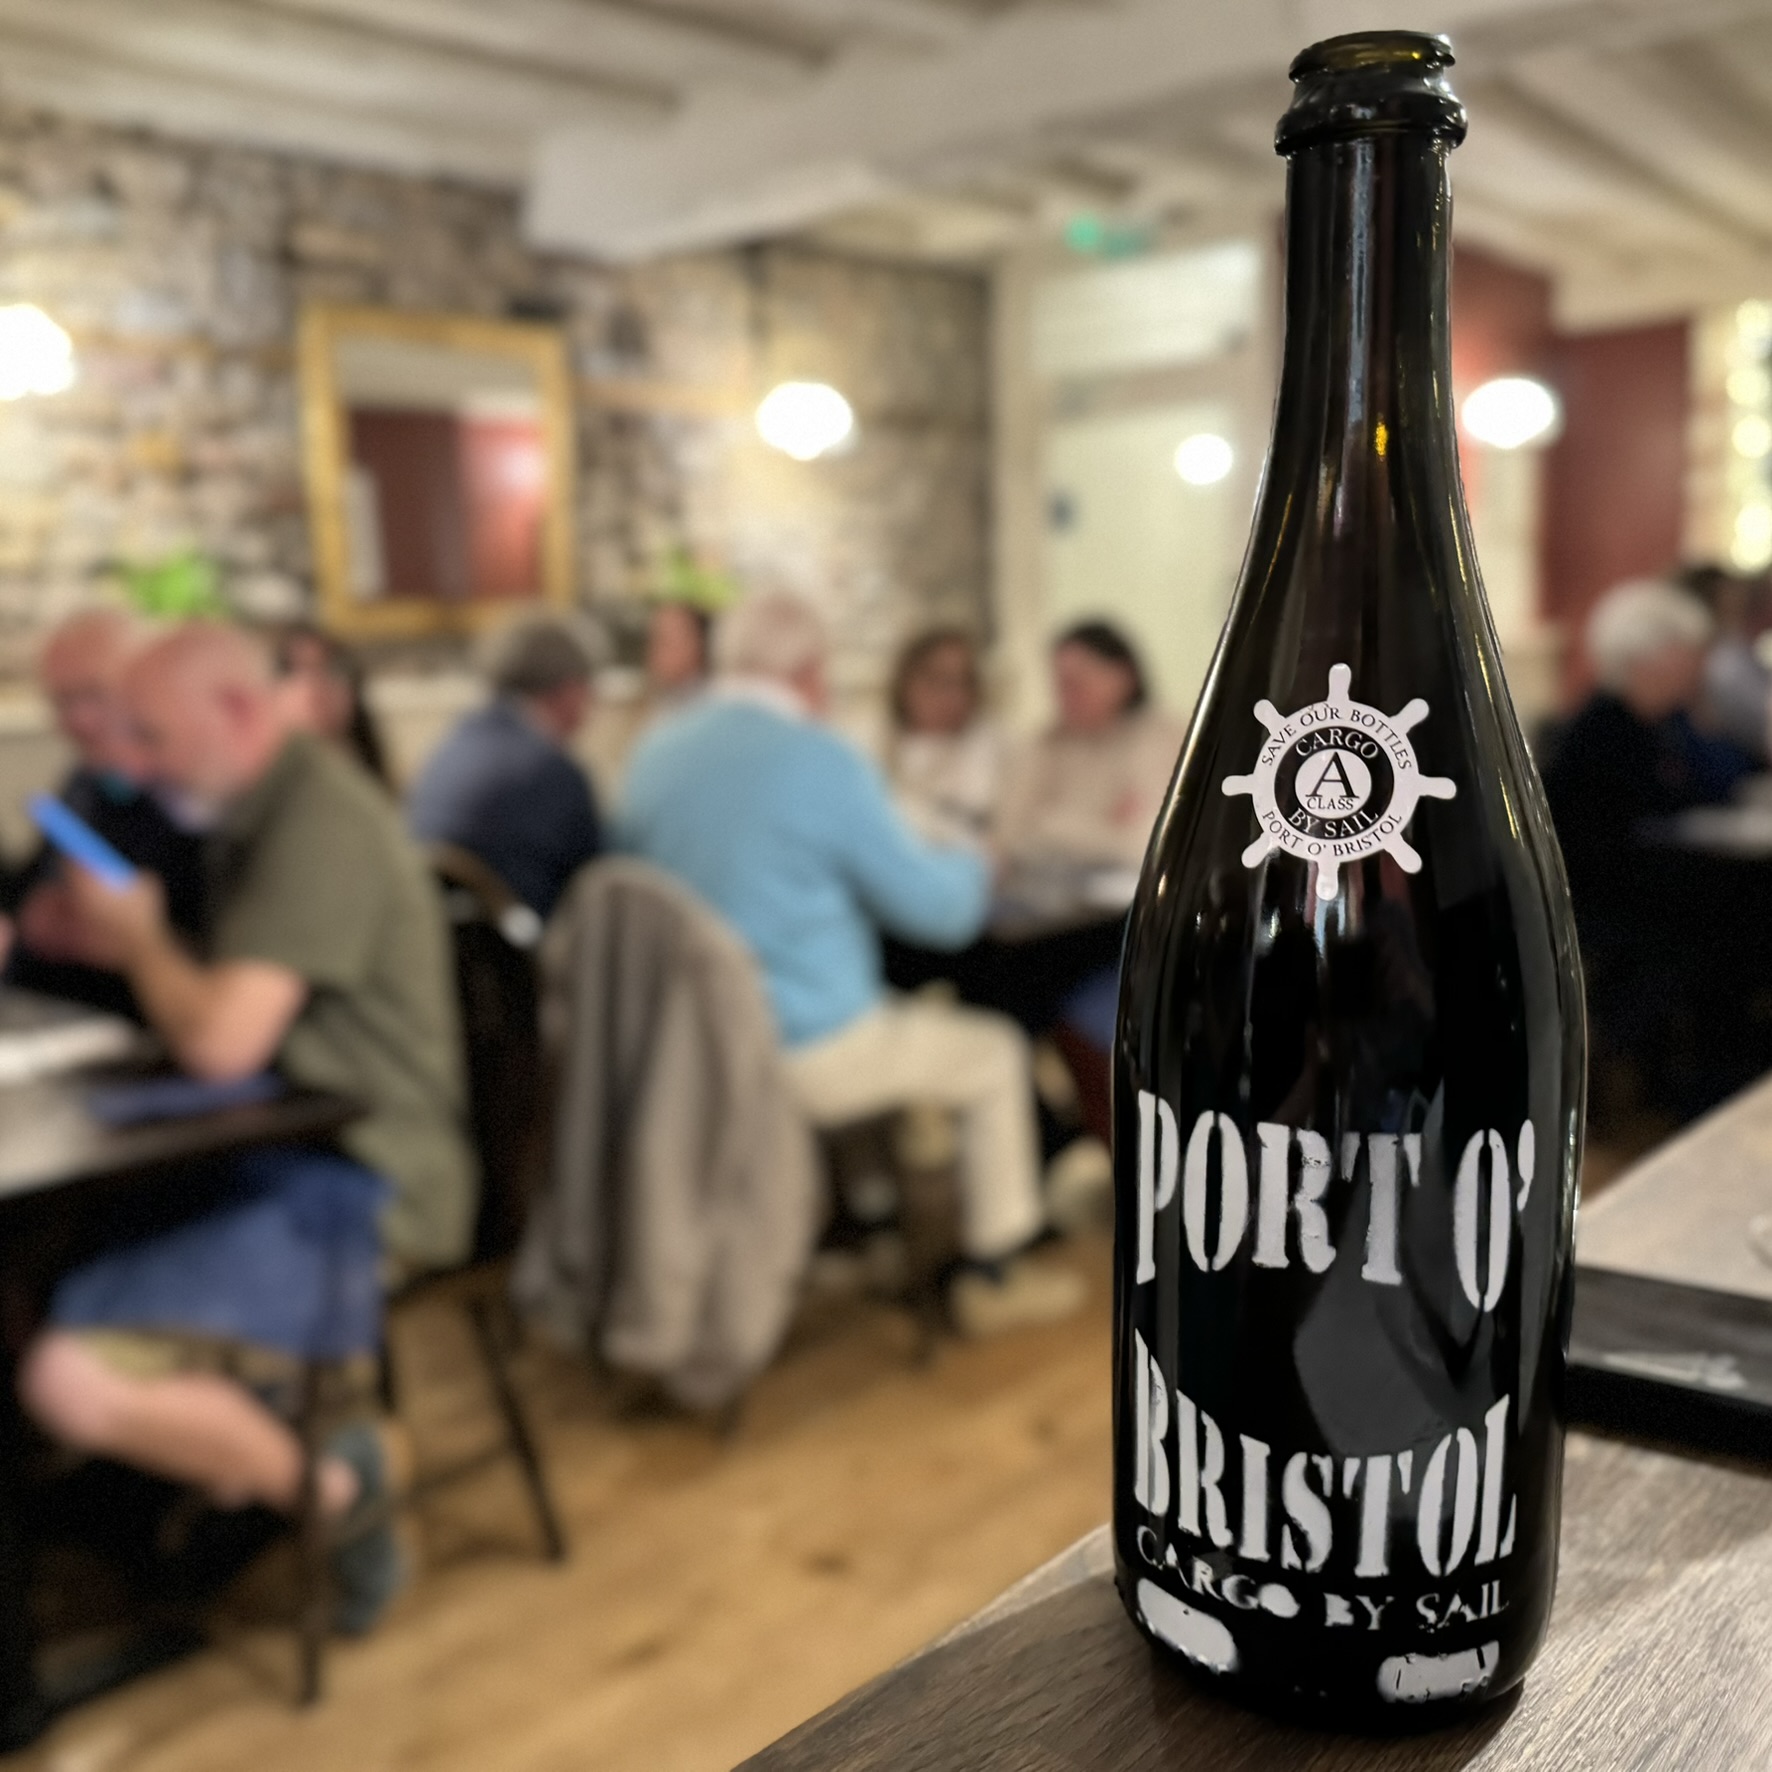 Port O' Bristol wine bottle with tasting event in background.